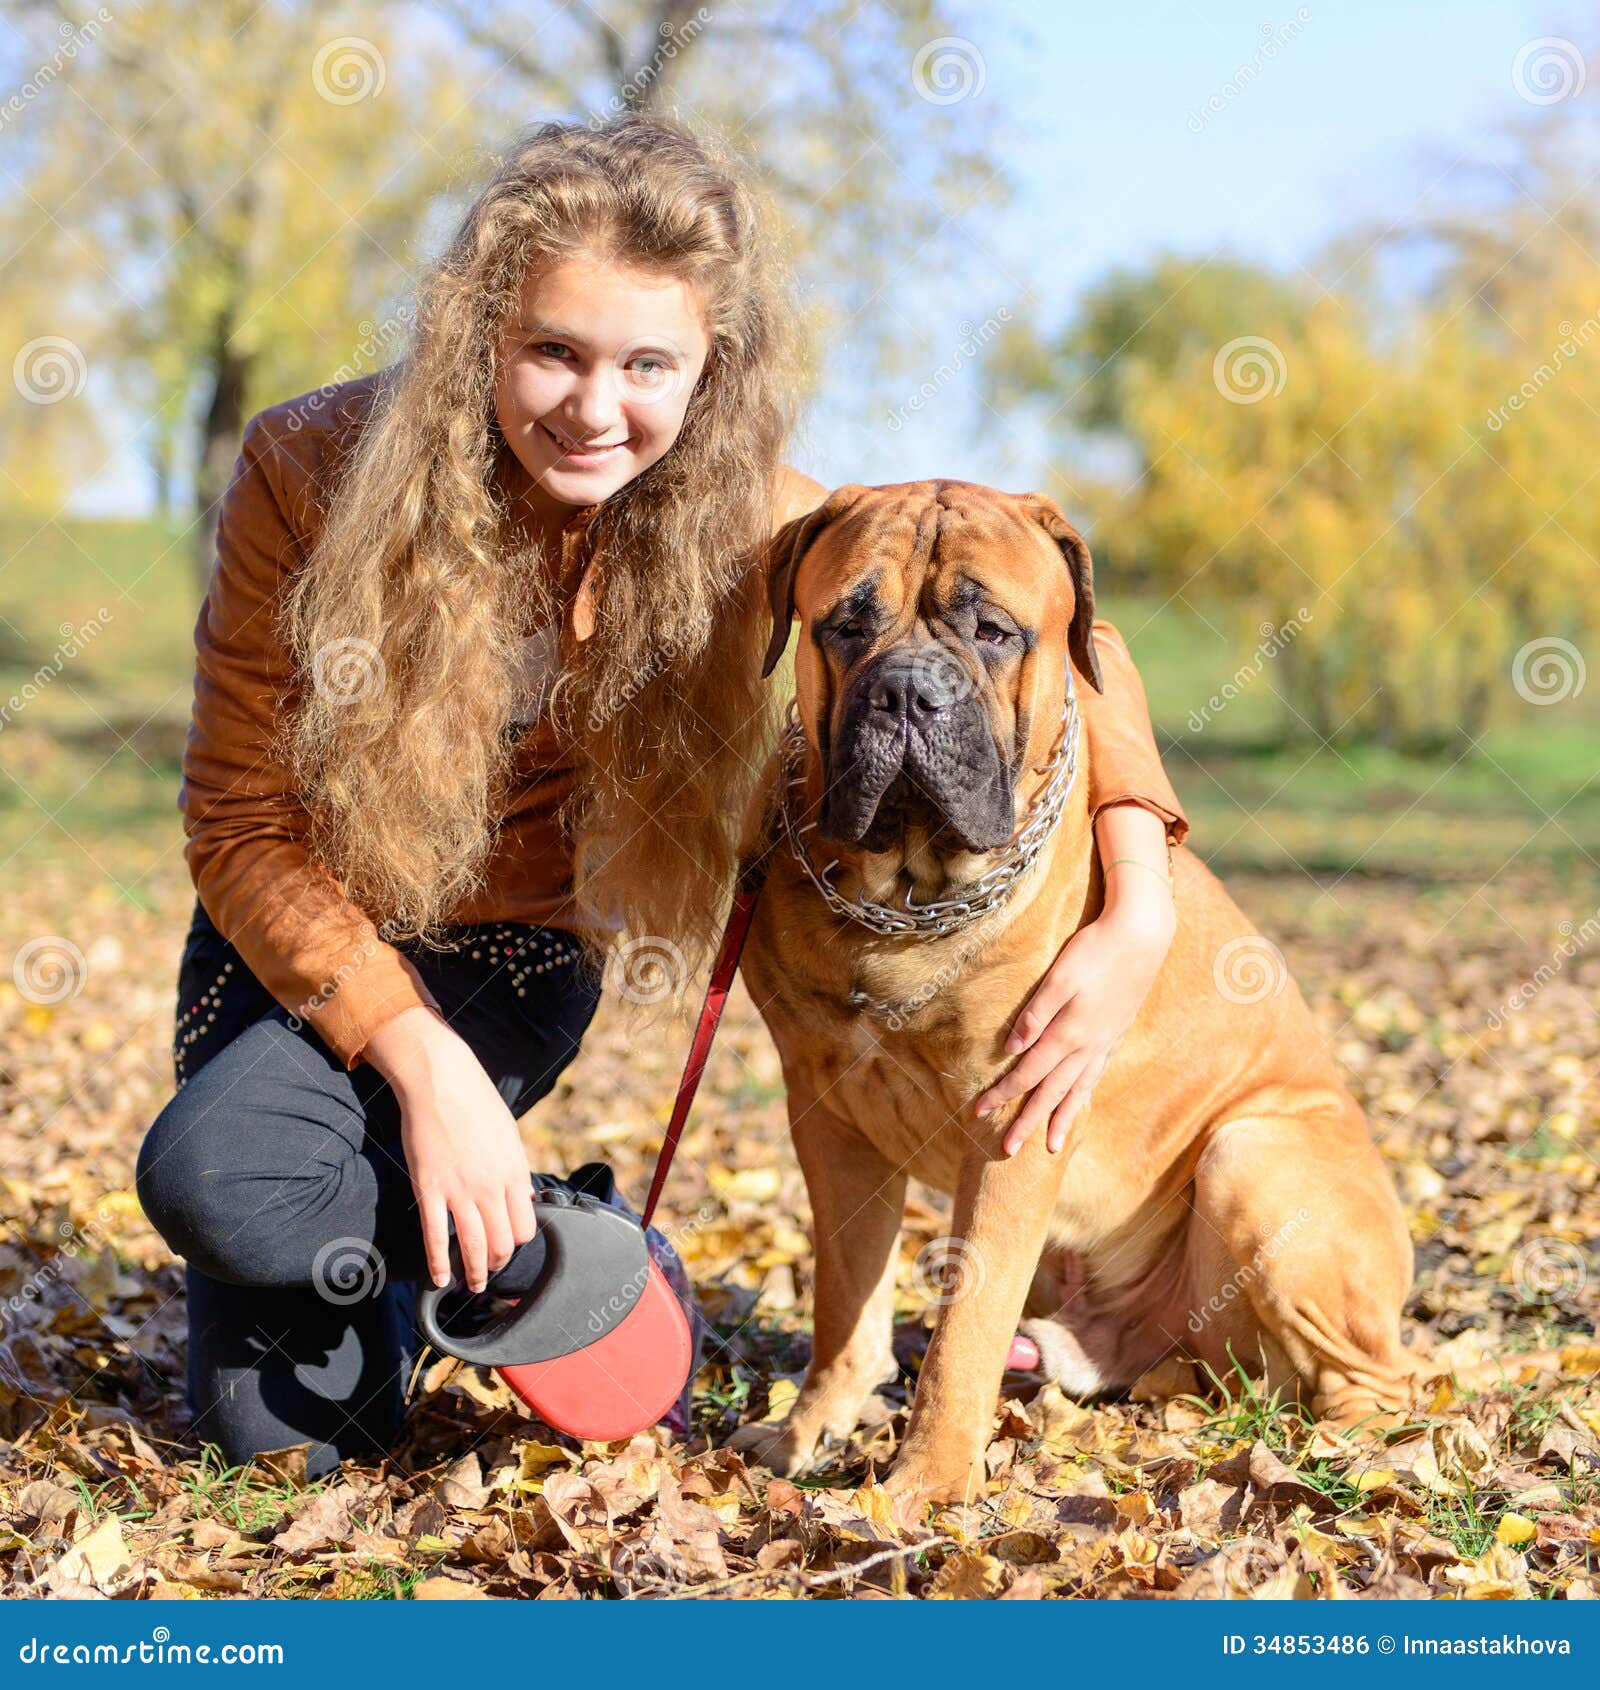 Girl And Dog Stock Images - Image: 76234